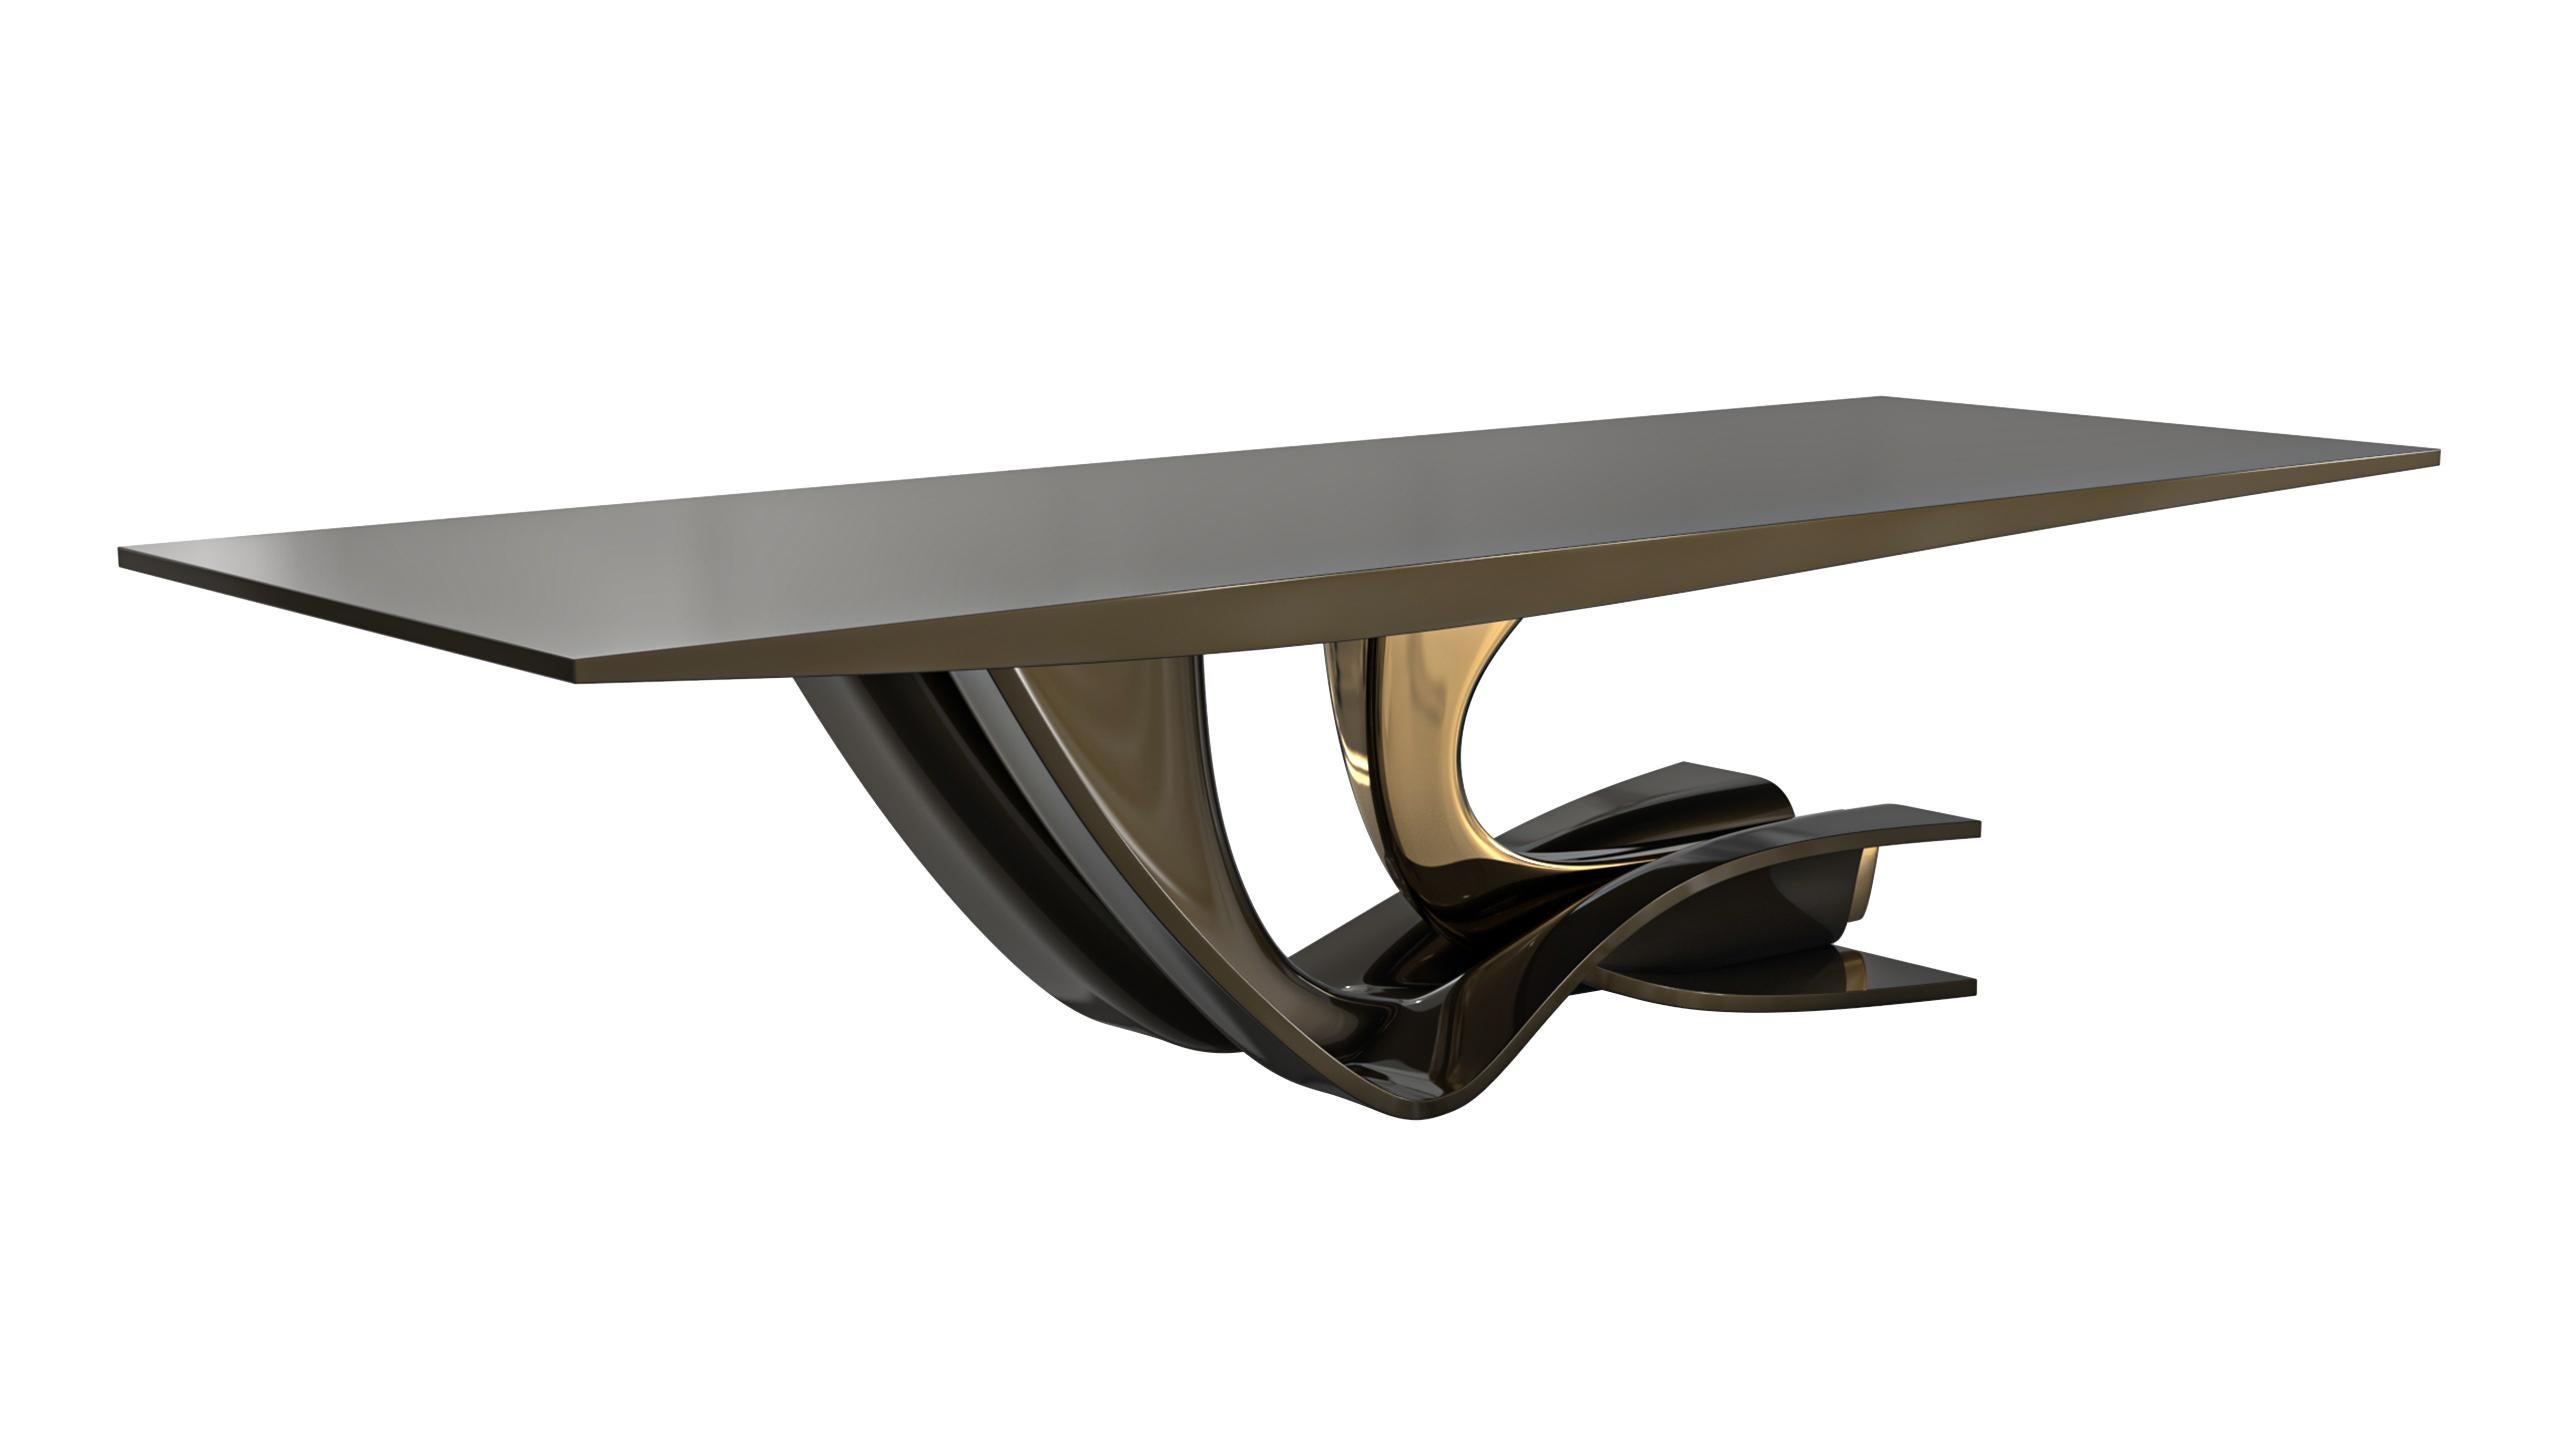 Respiro Collection.
Respiro dining table.

3 pieces WorldWide. Each of the products has a special 